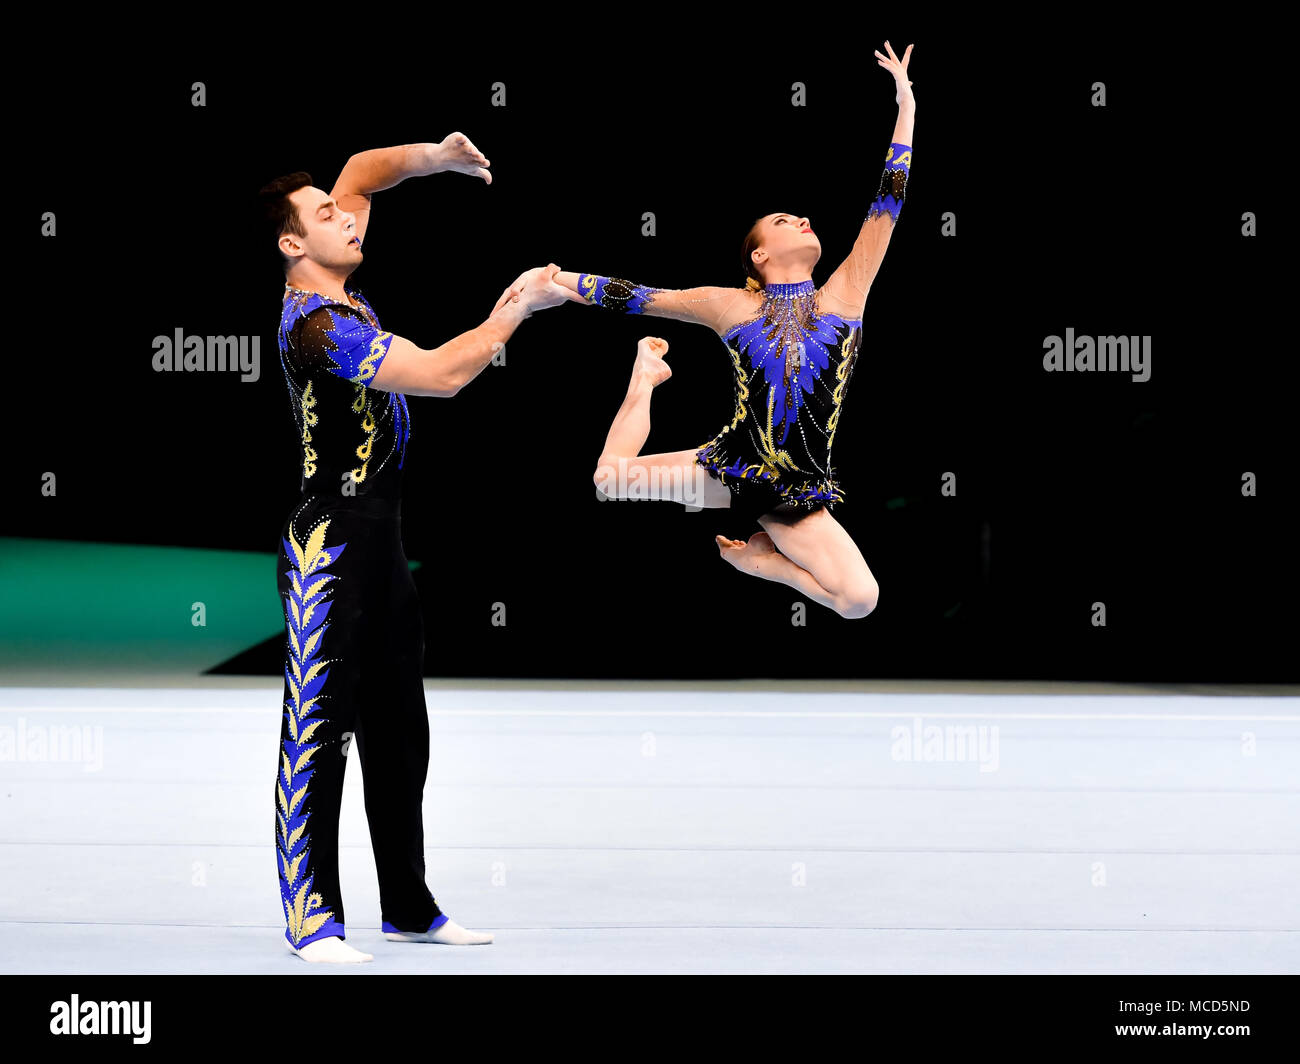 Antwerp, Belgium. 15th April 2018. Artur Bliakou and Volha Melnik (BLR) are competing in Mixed Pair Qualification Combined during the 26th World Championships Acrobatics Gymnastics 2018 at Lotto Arena on Sunday, 15 April 2018. ANTWERP, BELGIUM. Credit: Taka G Wu Credit: Taka Wu/Alamy Live News Stock Photo